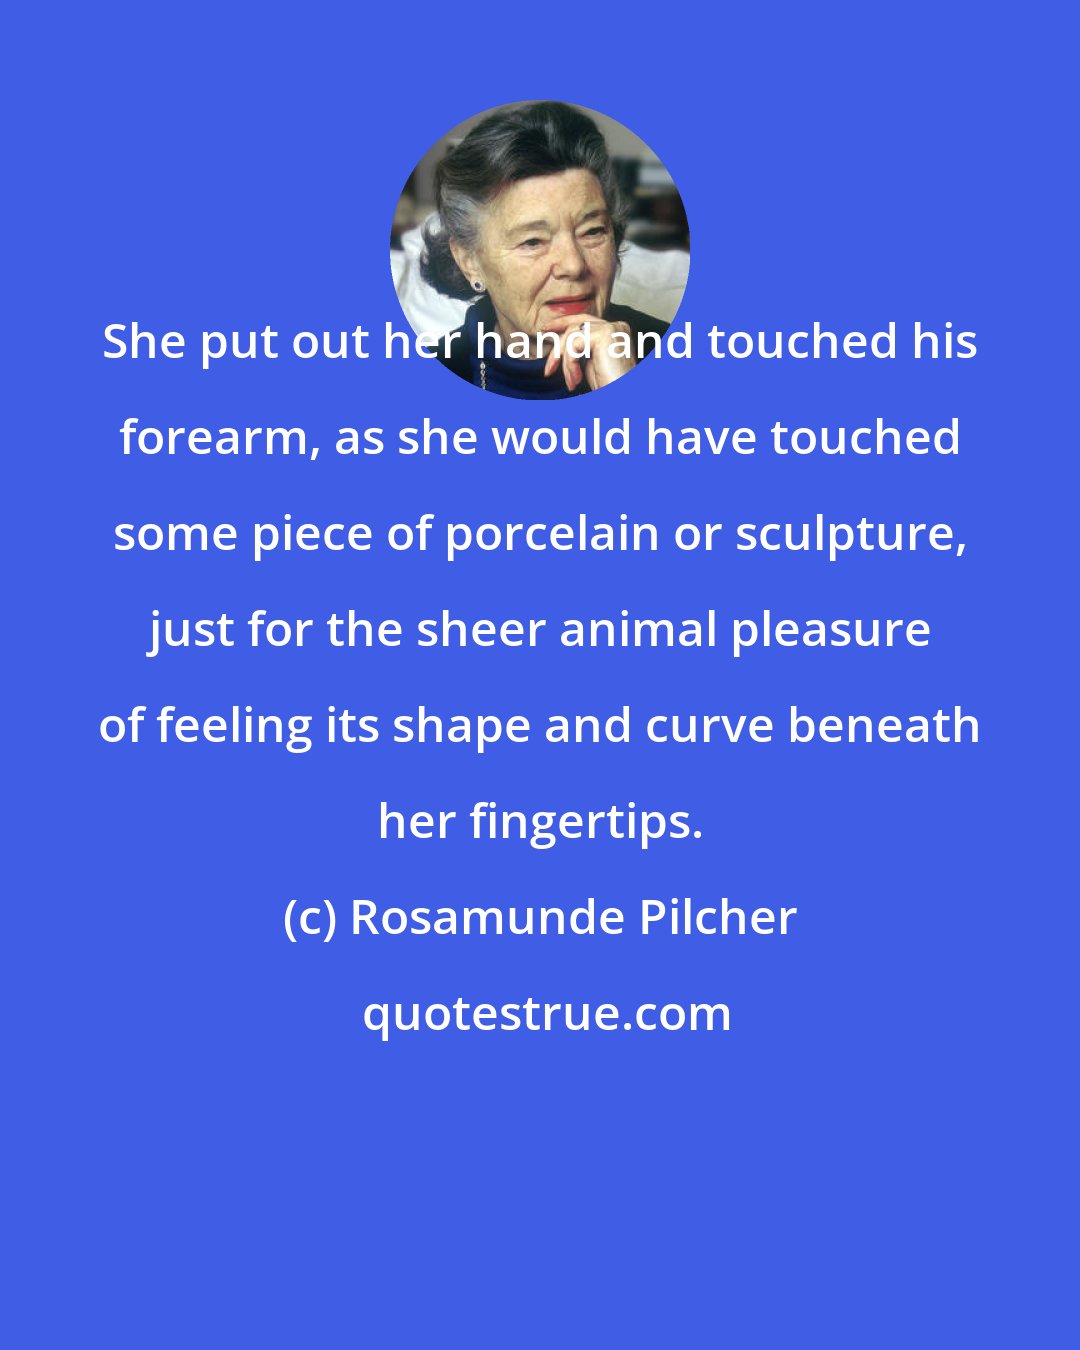 Rosamunde Pilcher: She put out her hand and touched his forearm, as she would have touched some piece of porcelain or sculpture, just for the sheer animal pleasure of feeling its shape and curve beneath her fingertips.